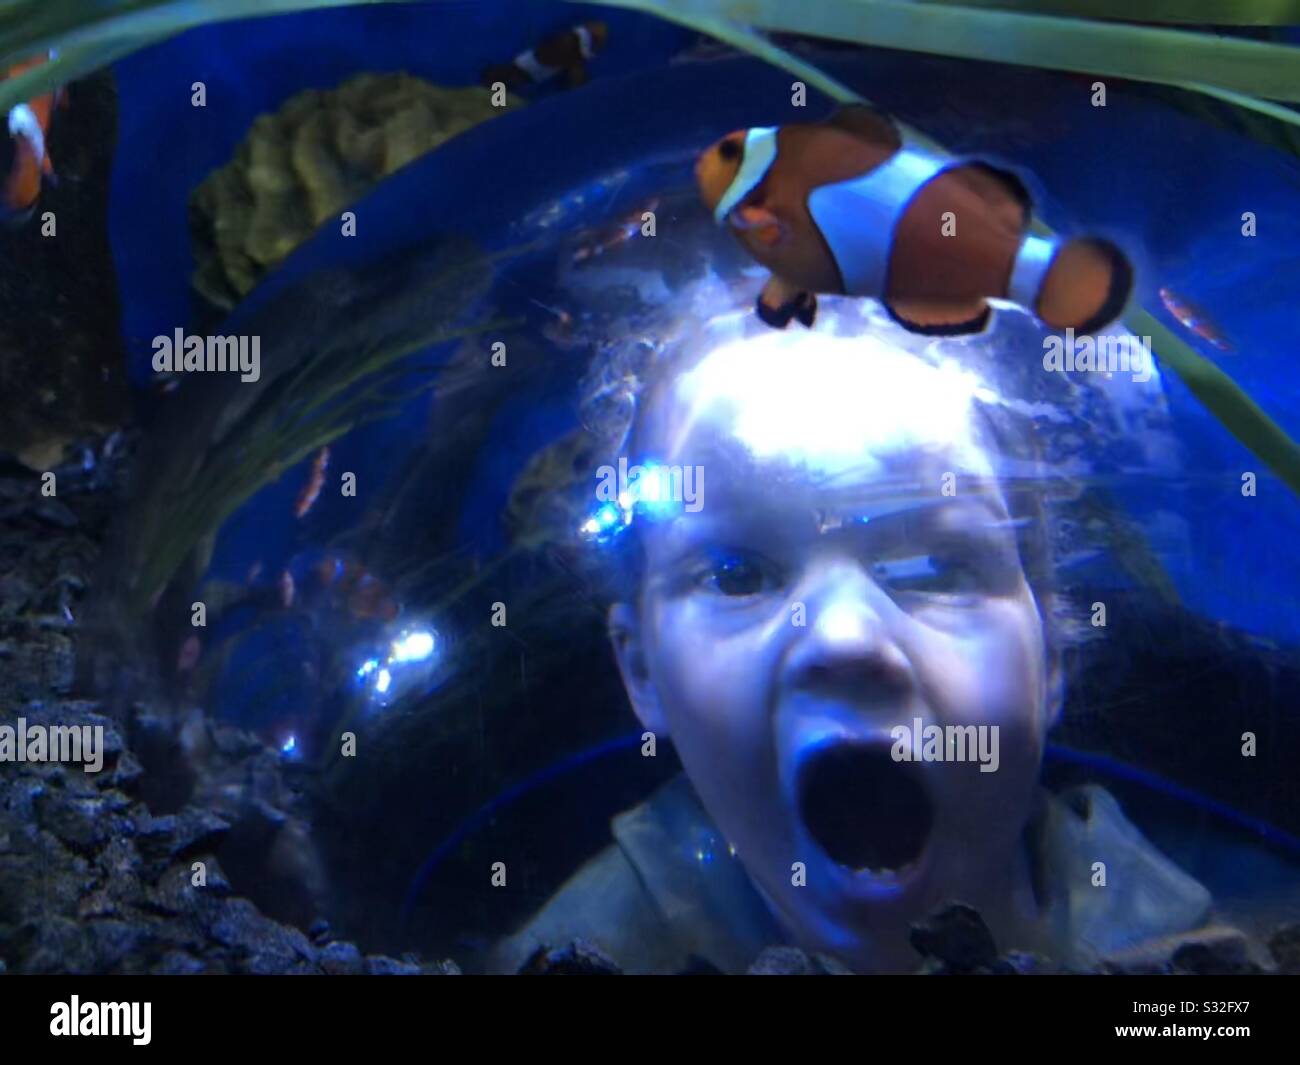 Young boy with mouth open under glass dome inside a fish tank. Clown fish in foreground. Stock Photo